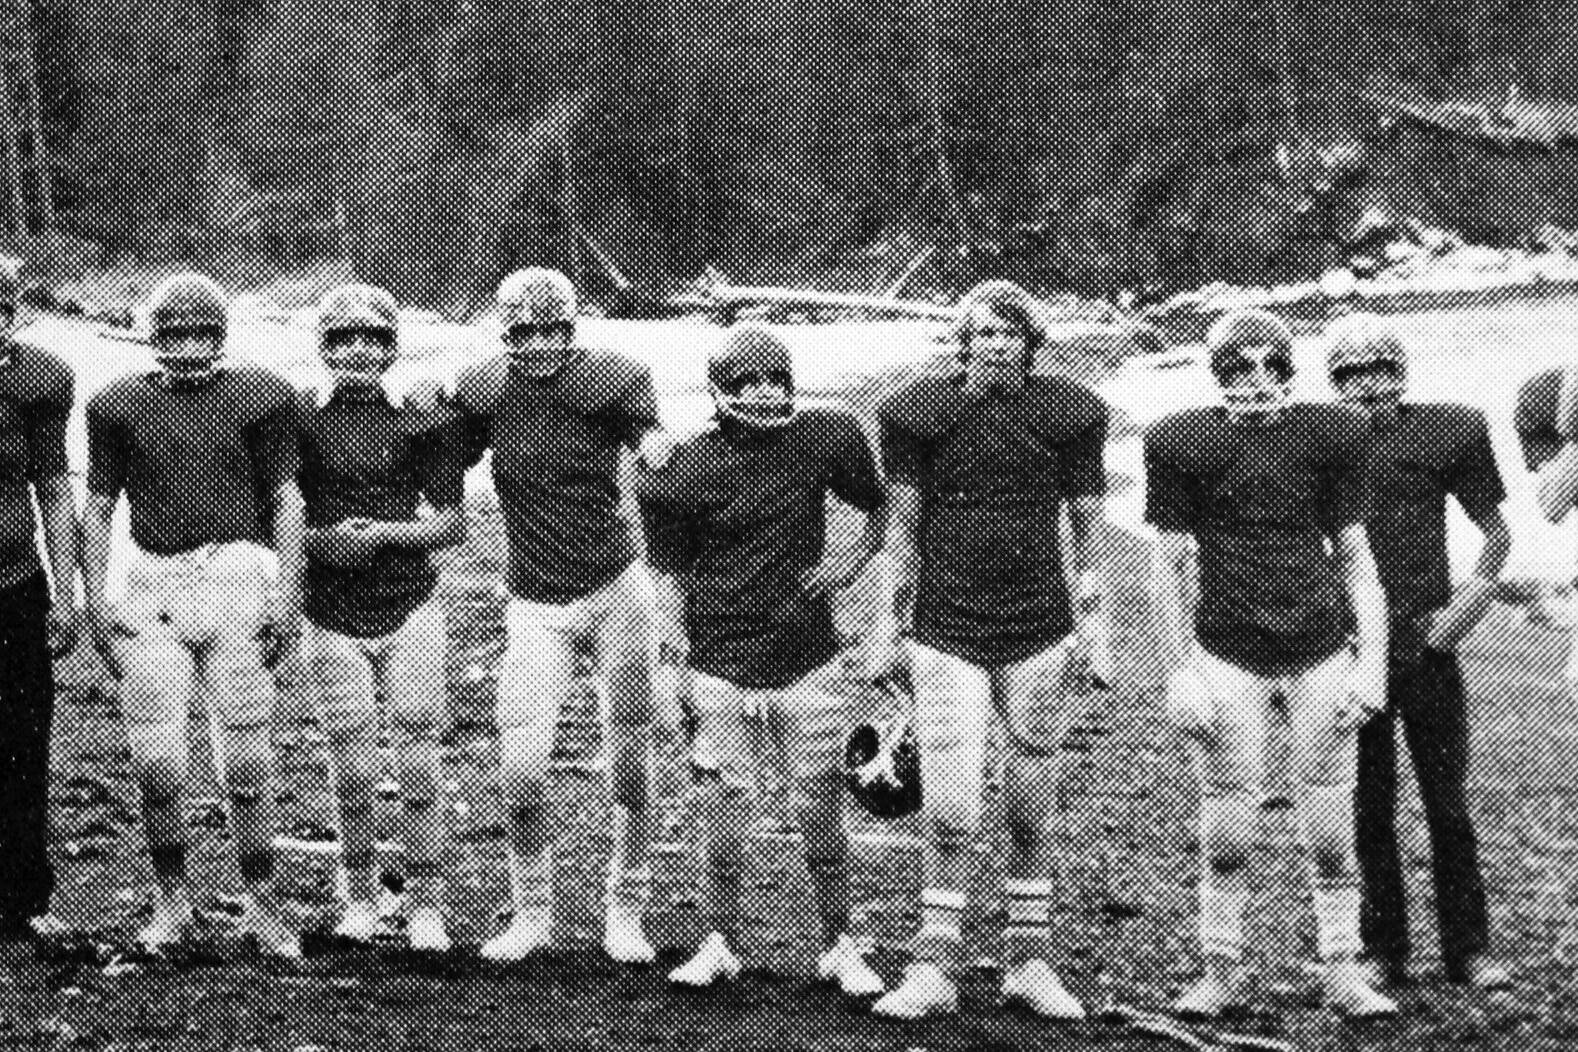 Rex Edwards experimented with many activities, including fencing, for the students at the school in Seldovia. In the 1973-74 school year, he even attempted to coach football, even though the only “field” available was the beach. Here are the “Seldovia Retreaters” as they appeared in the school’s 1974 yearbook.